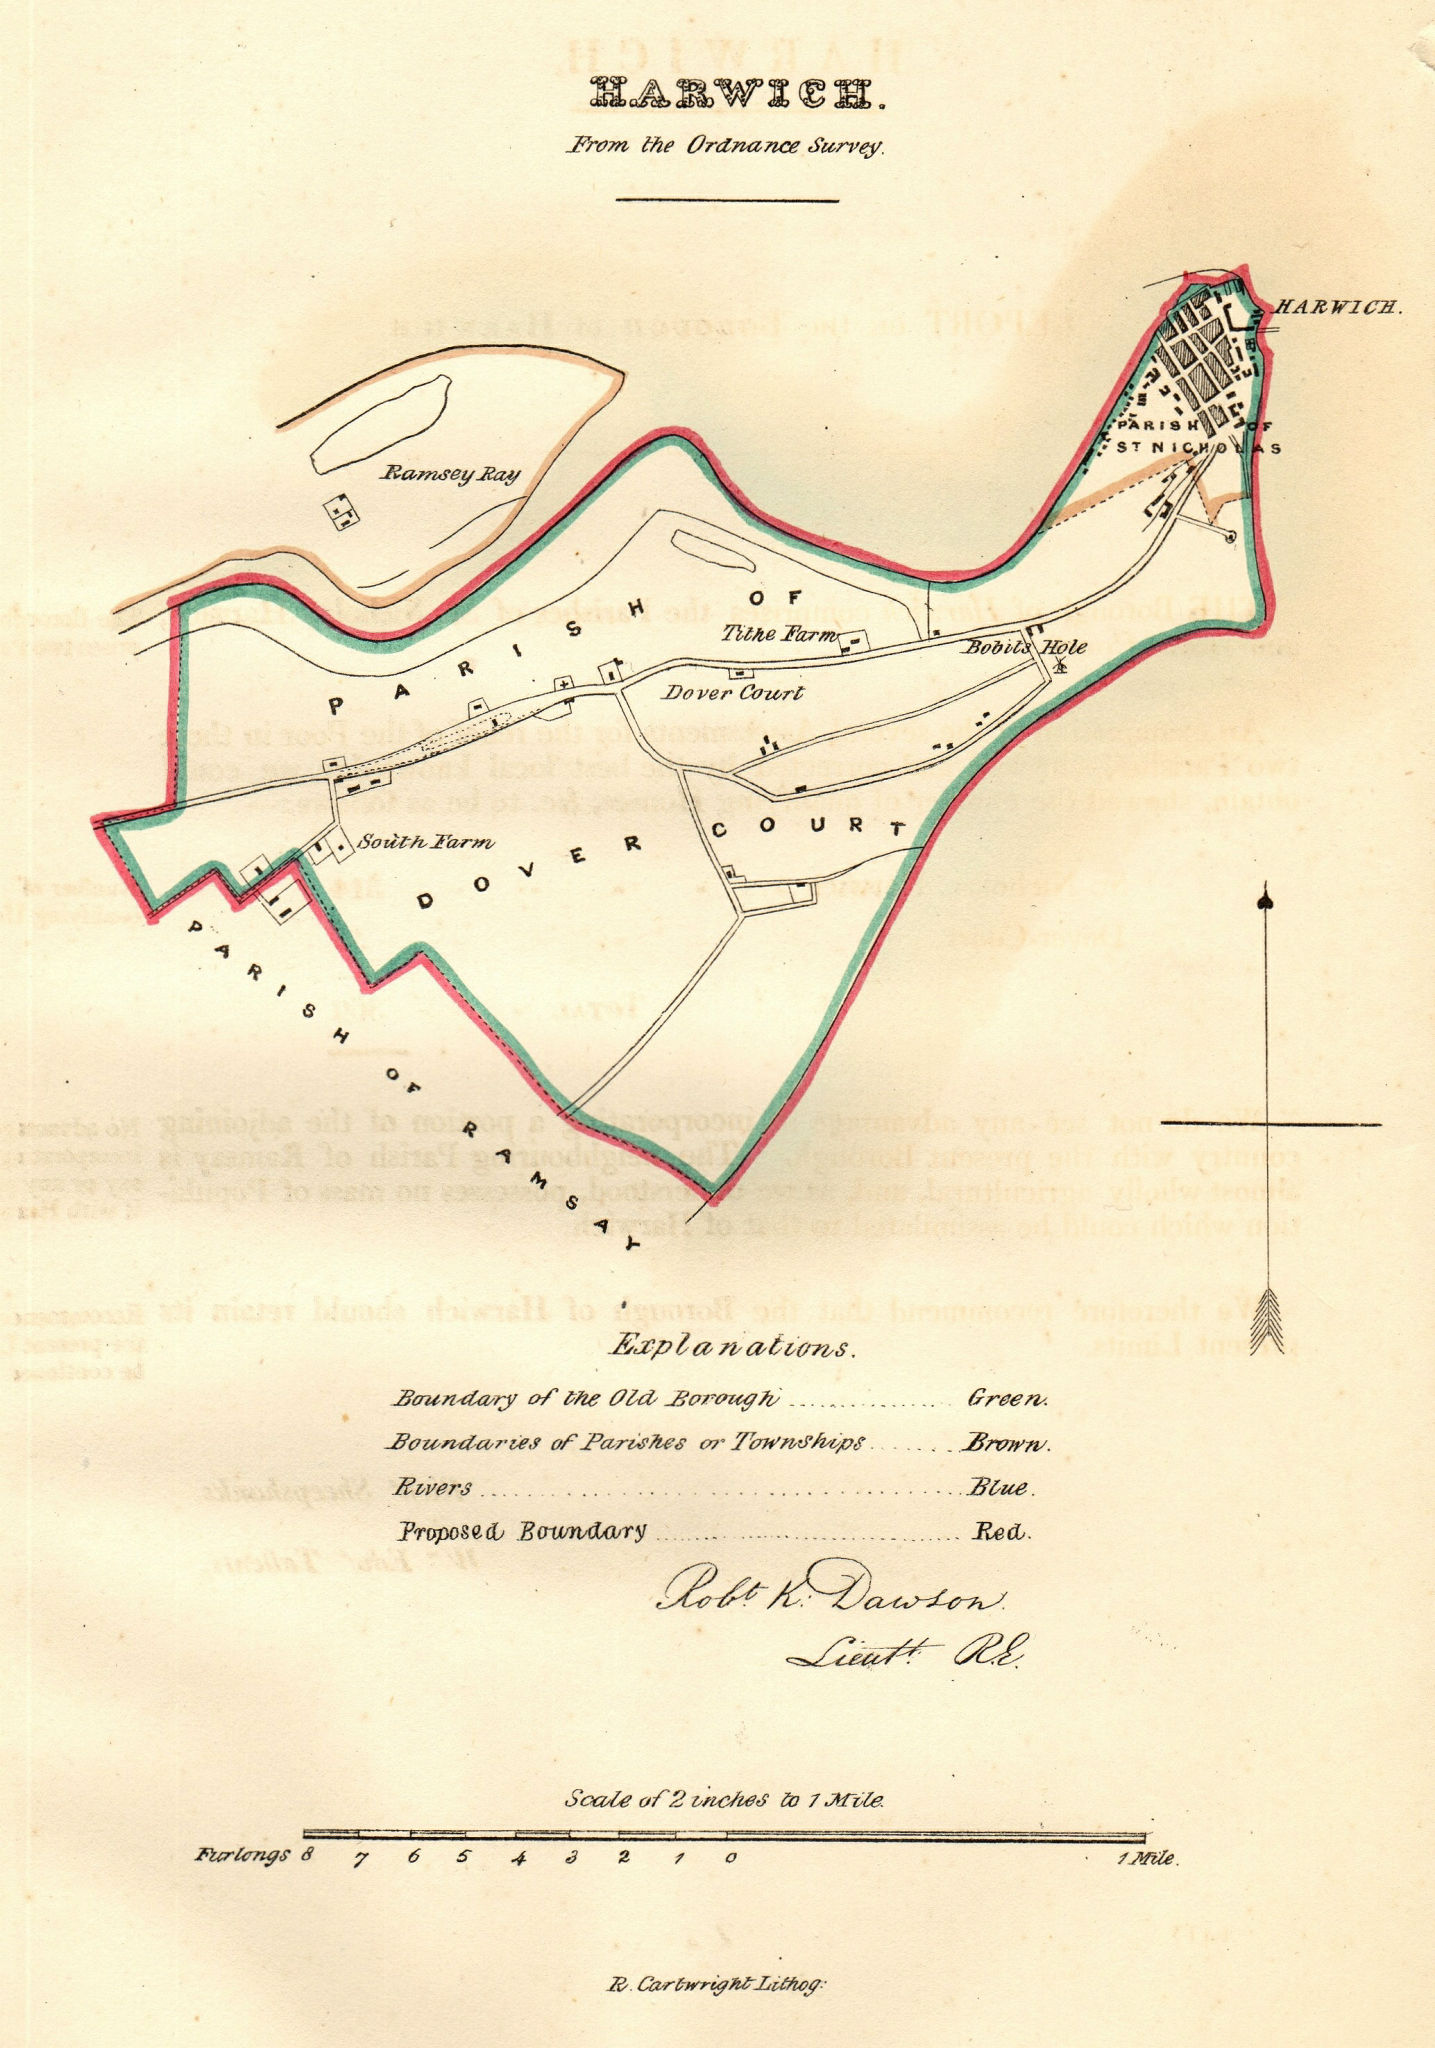 Associate Product HARWICH town/borough plan for the REFORM ACT. Essex. DAWSON 1832 old map